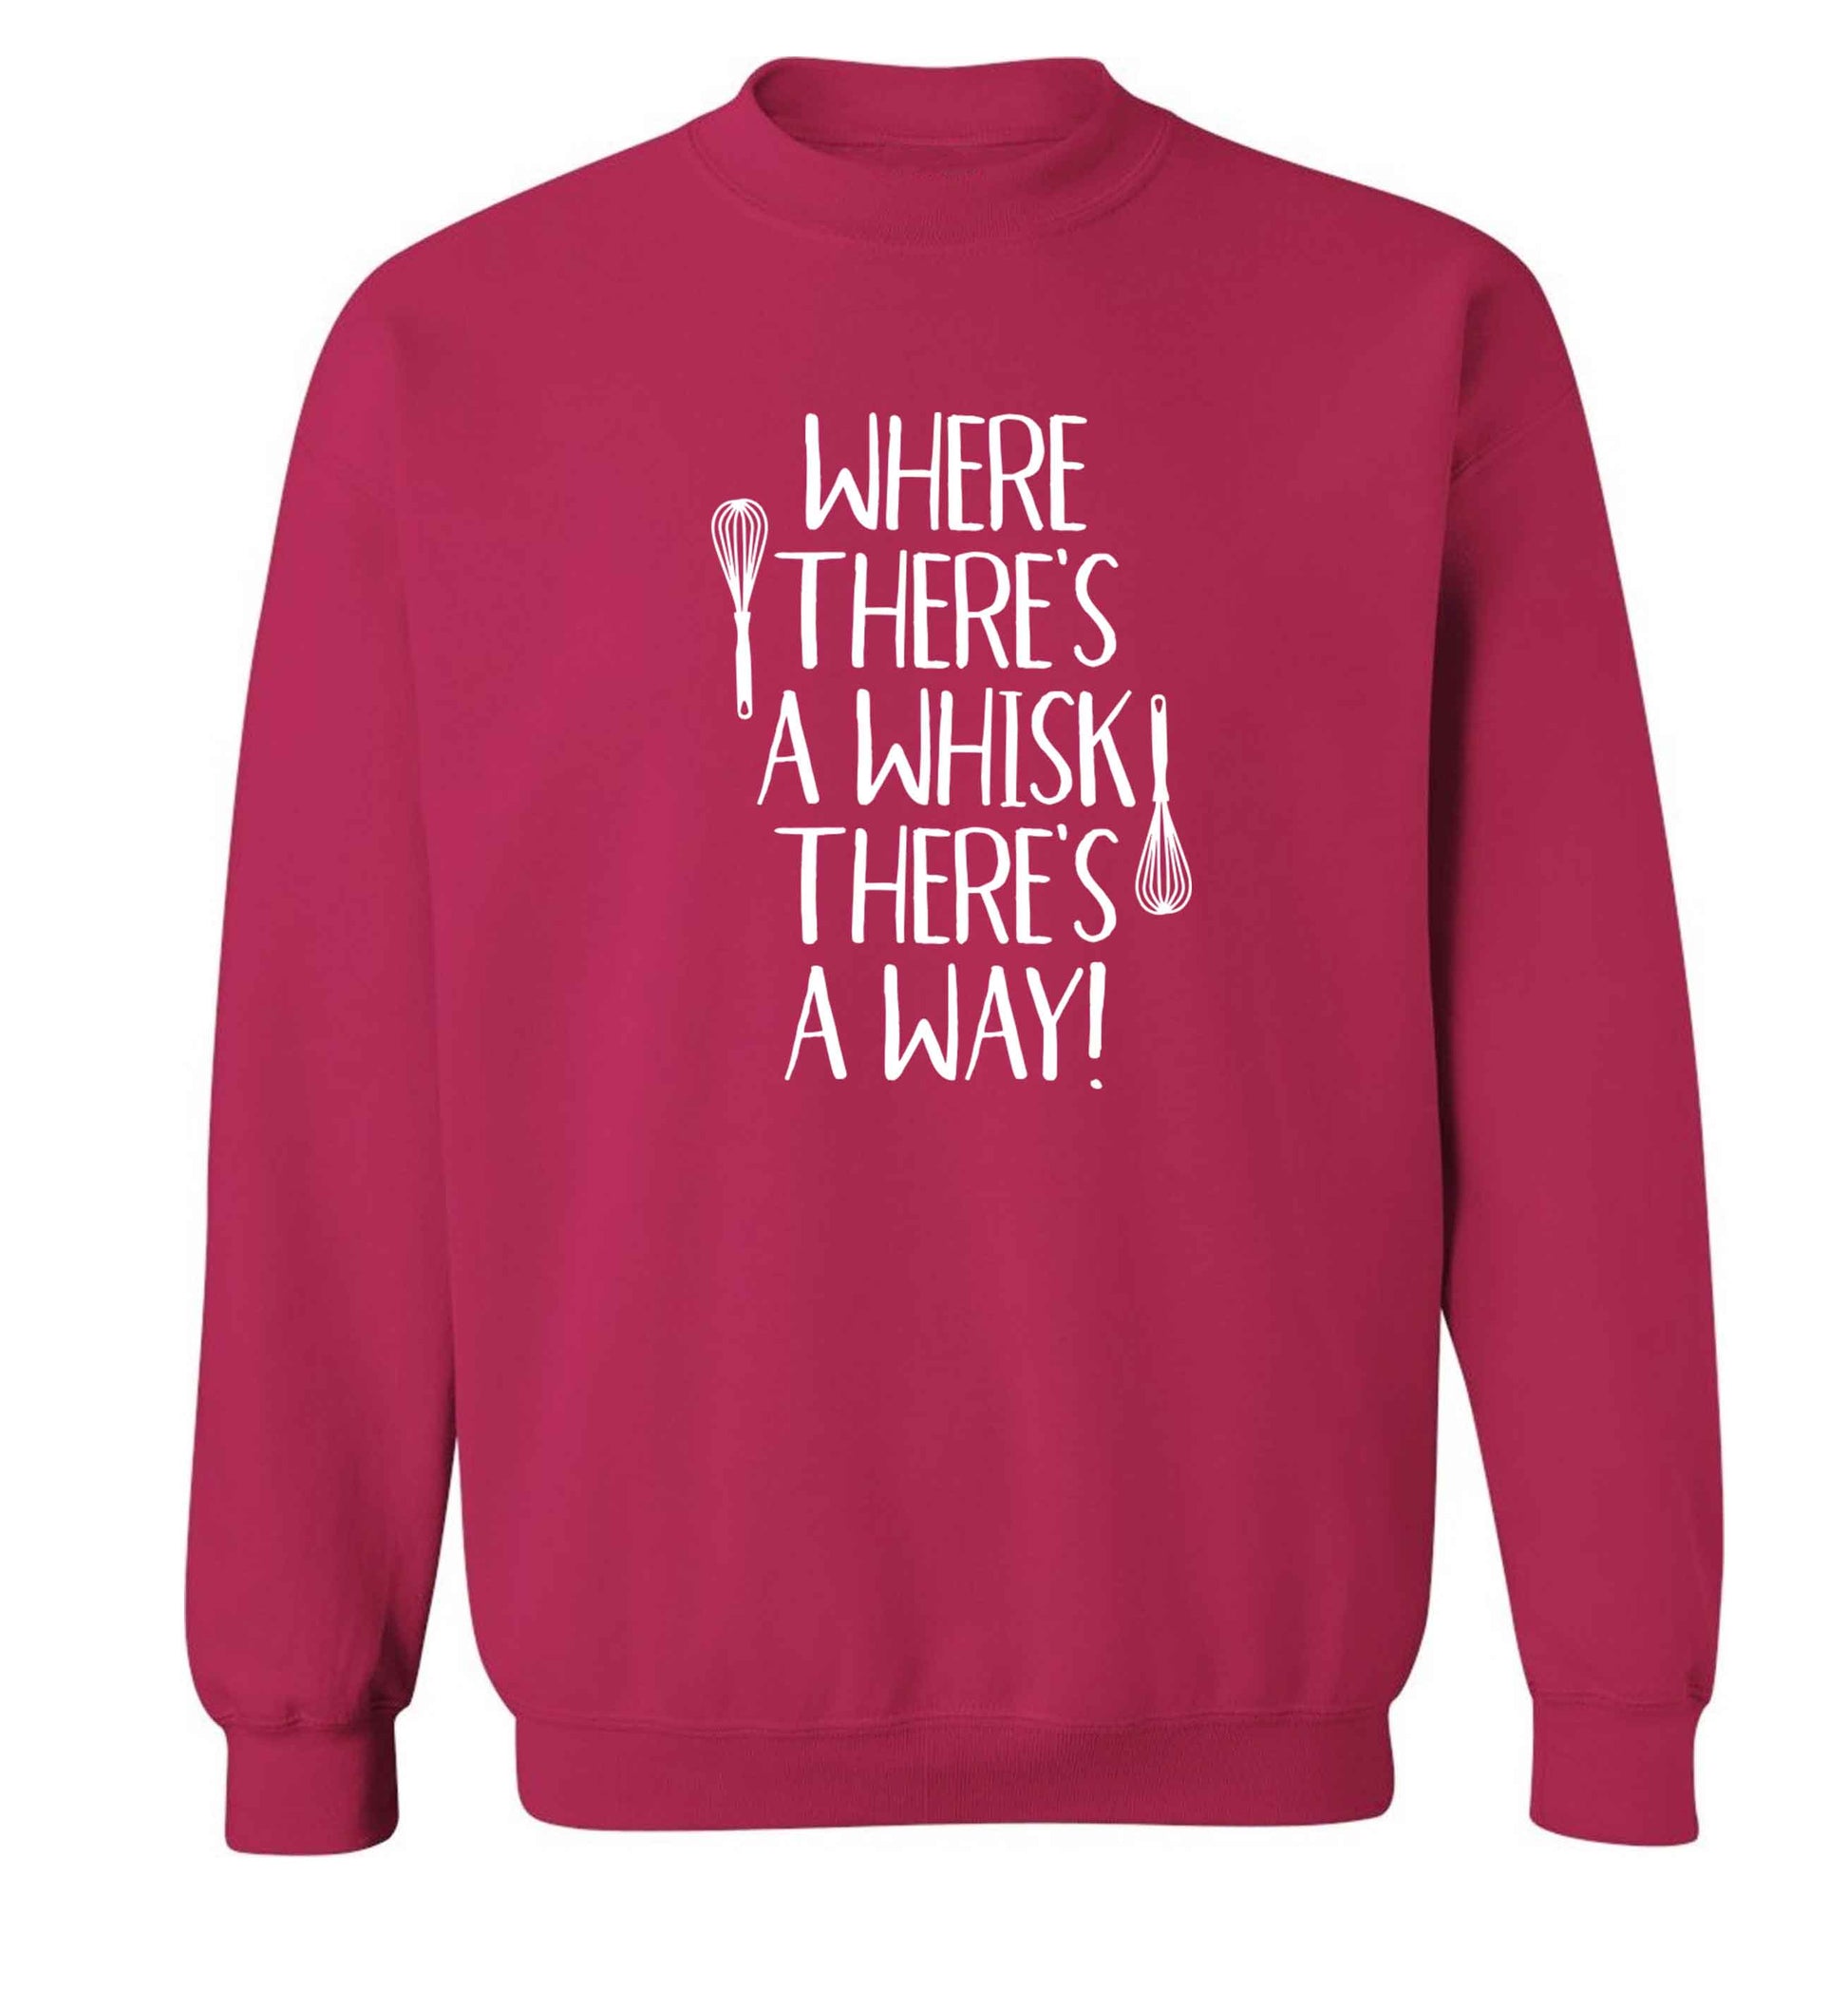 Where there's a whisk there's a way Adult's unisex pink Sweater 2XL